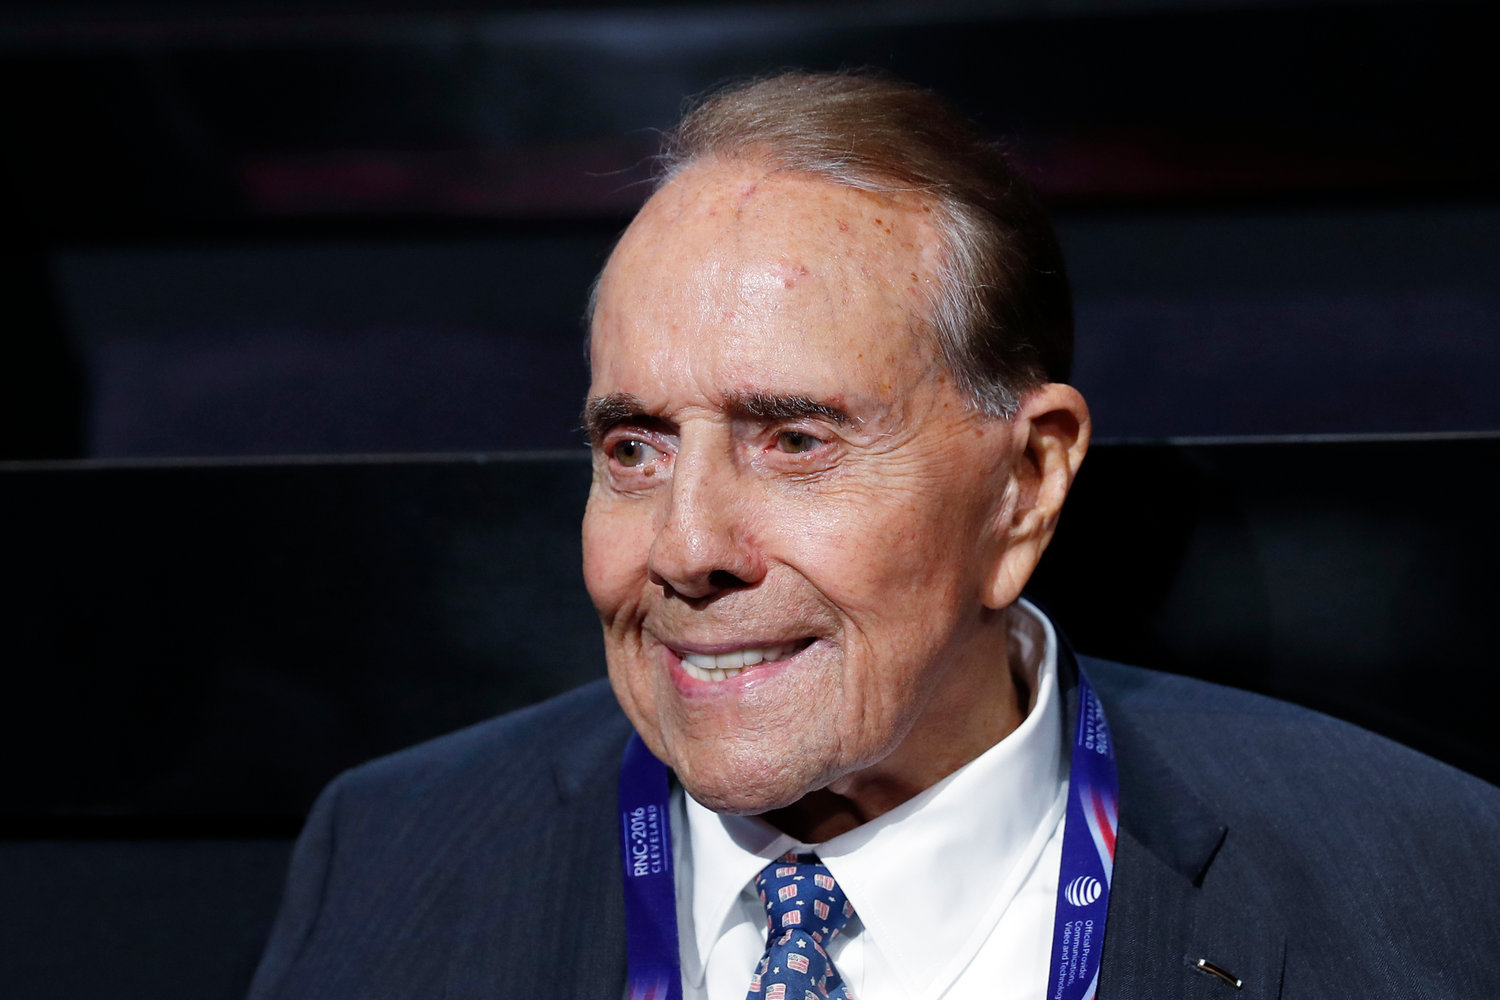 Bob Dole says he's been diagnosed with Stage 4 lung cancer | Rome Daily Sentinel